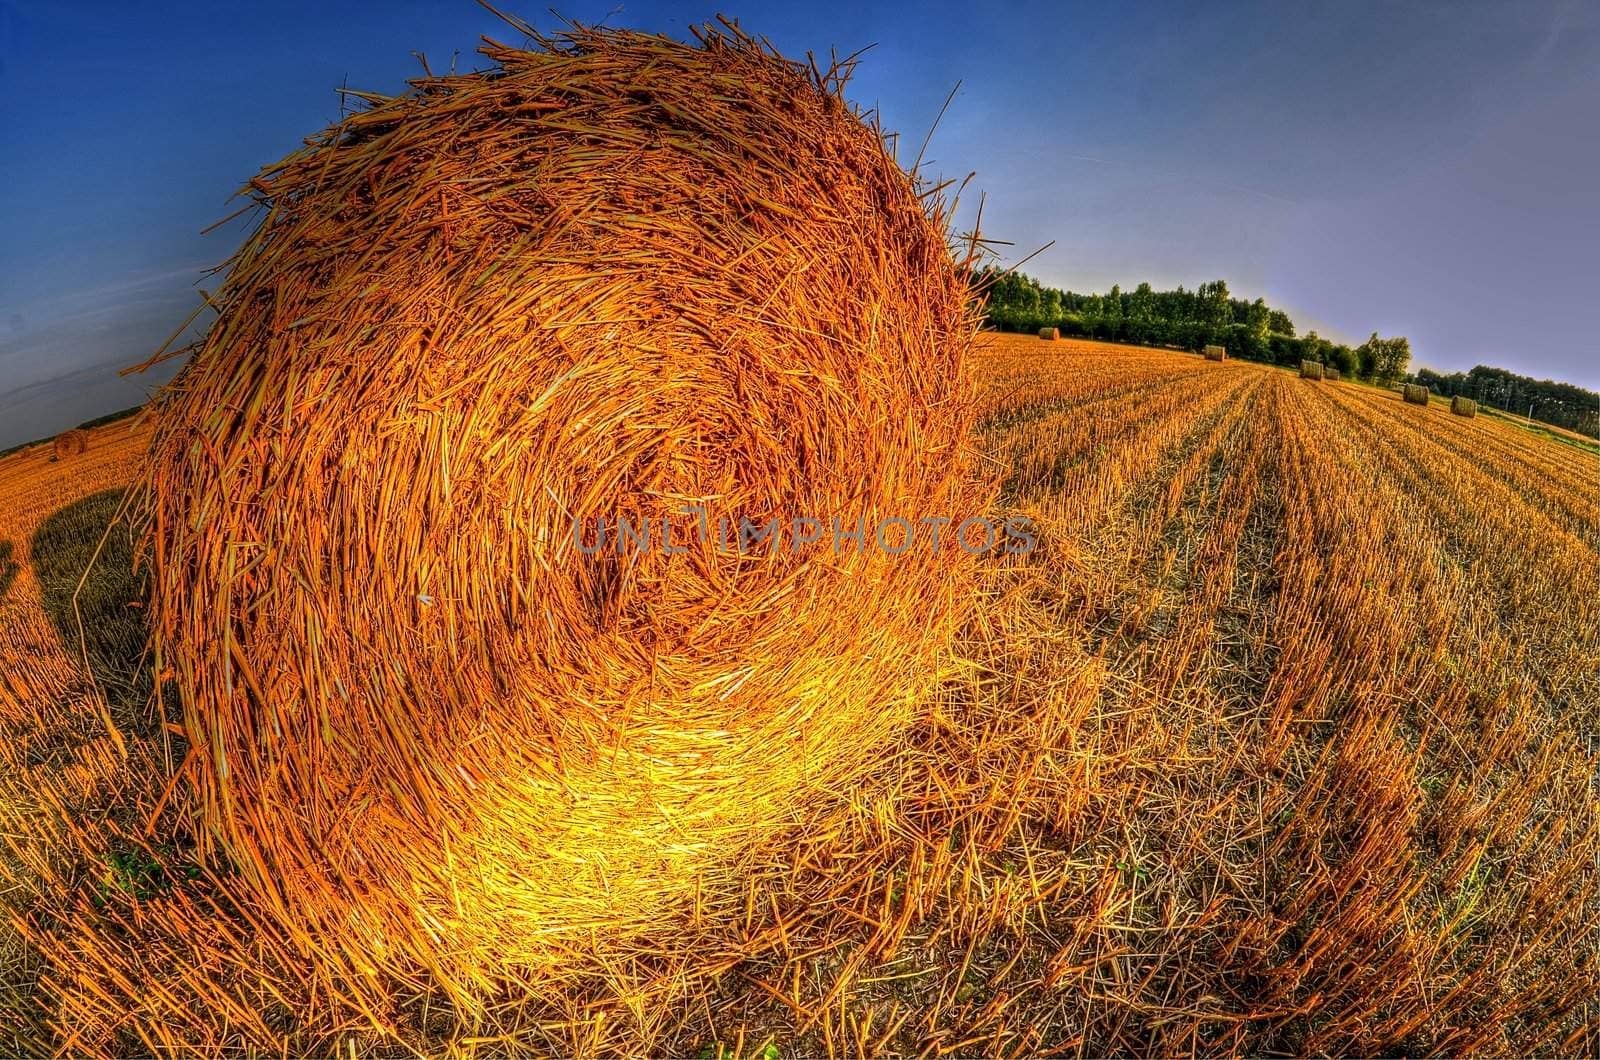 This photo present bales of straw after harvest grain at sunset.